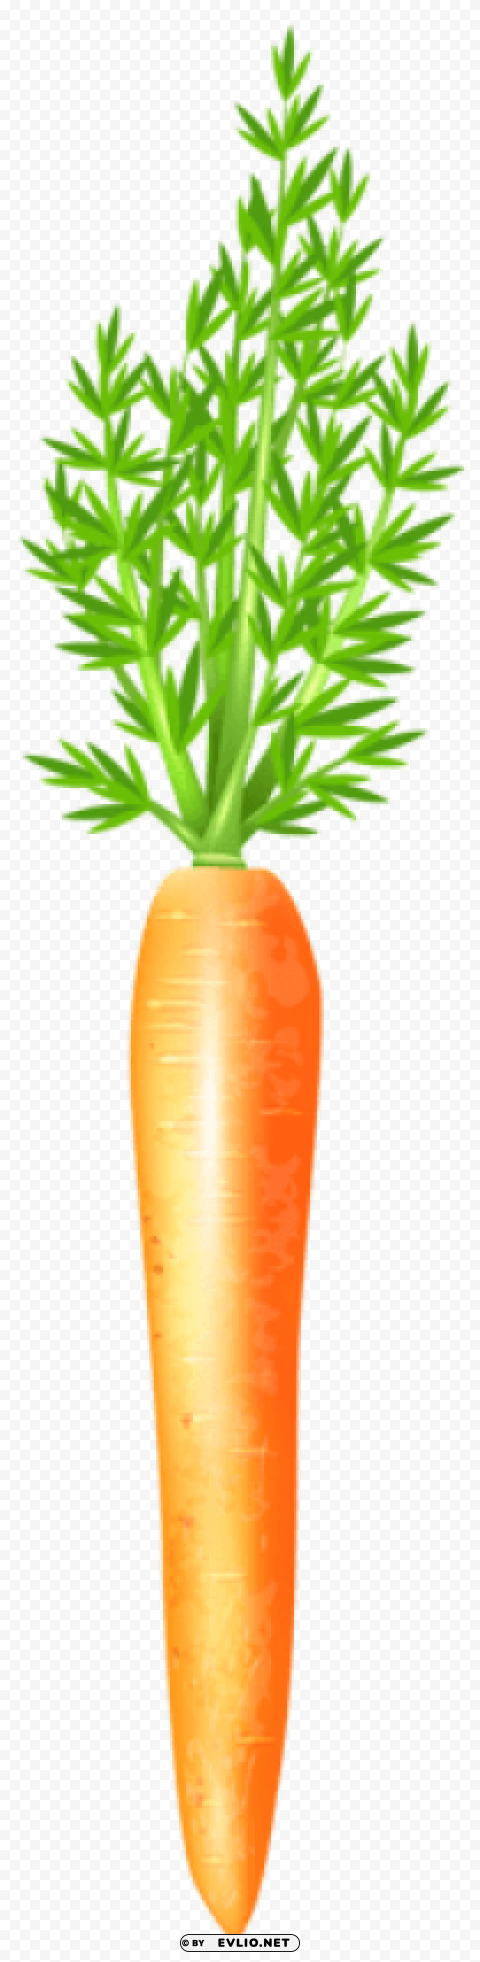 carrot free HighQuality Transparent PNG Element